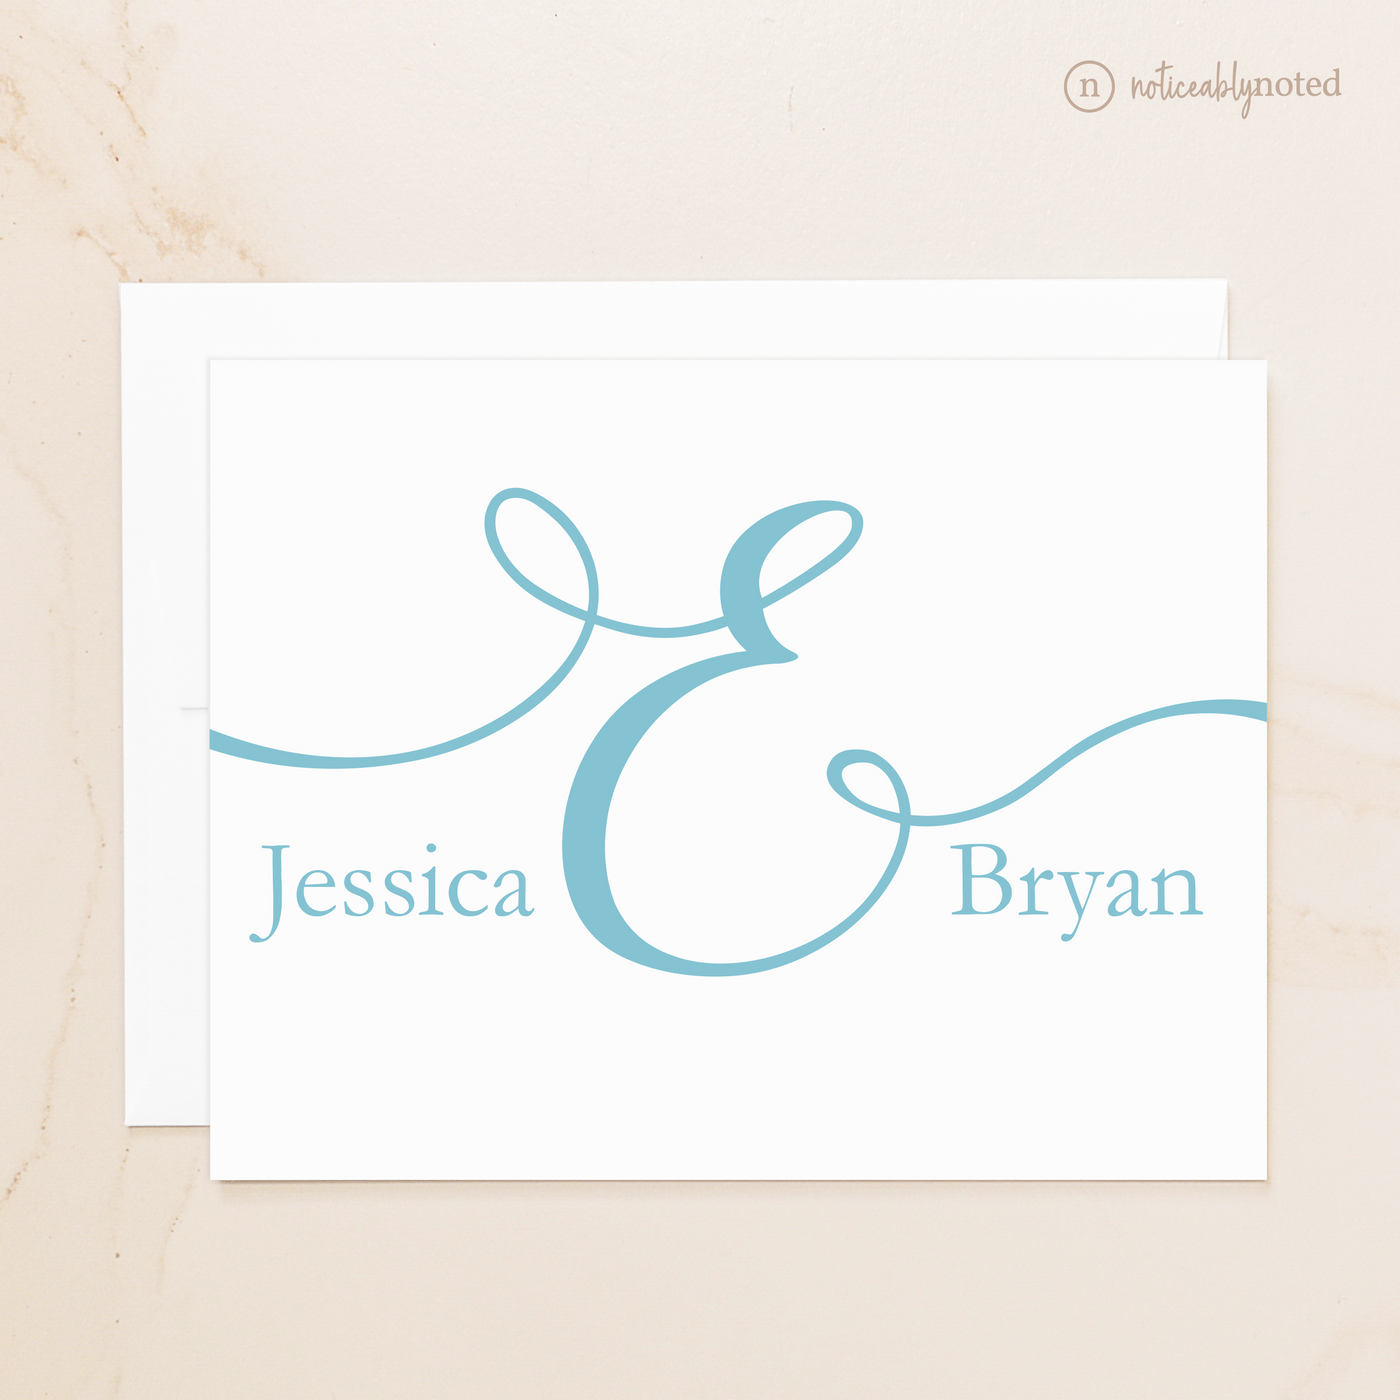 Wedding Personalized Note Cards | Noticeably Noted